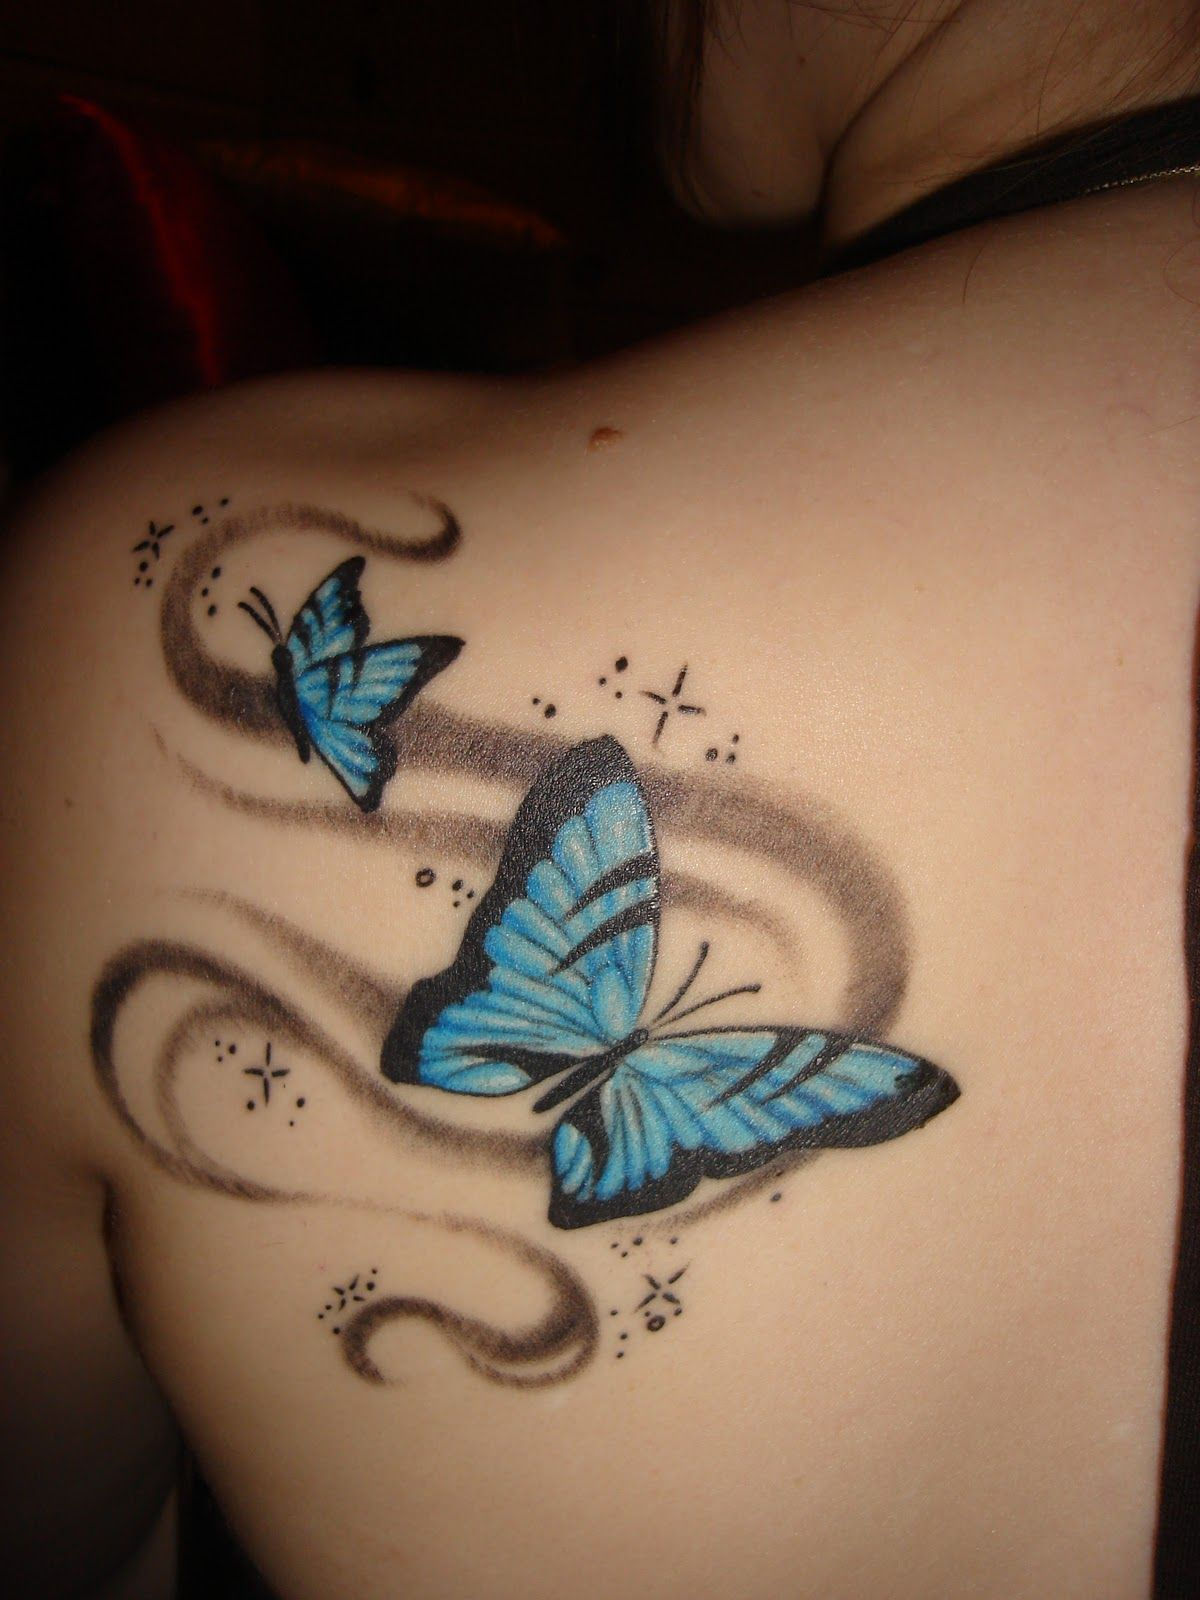 70 Awesome Shoulder Tattoos Tattoos Butterfly Tattoo Designs throughout dimensions 1200 X 1600